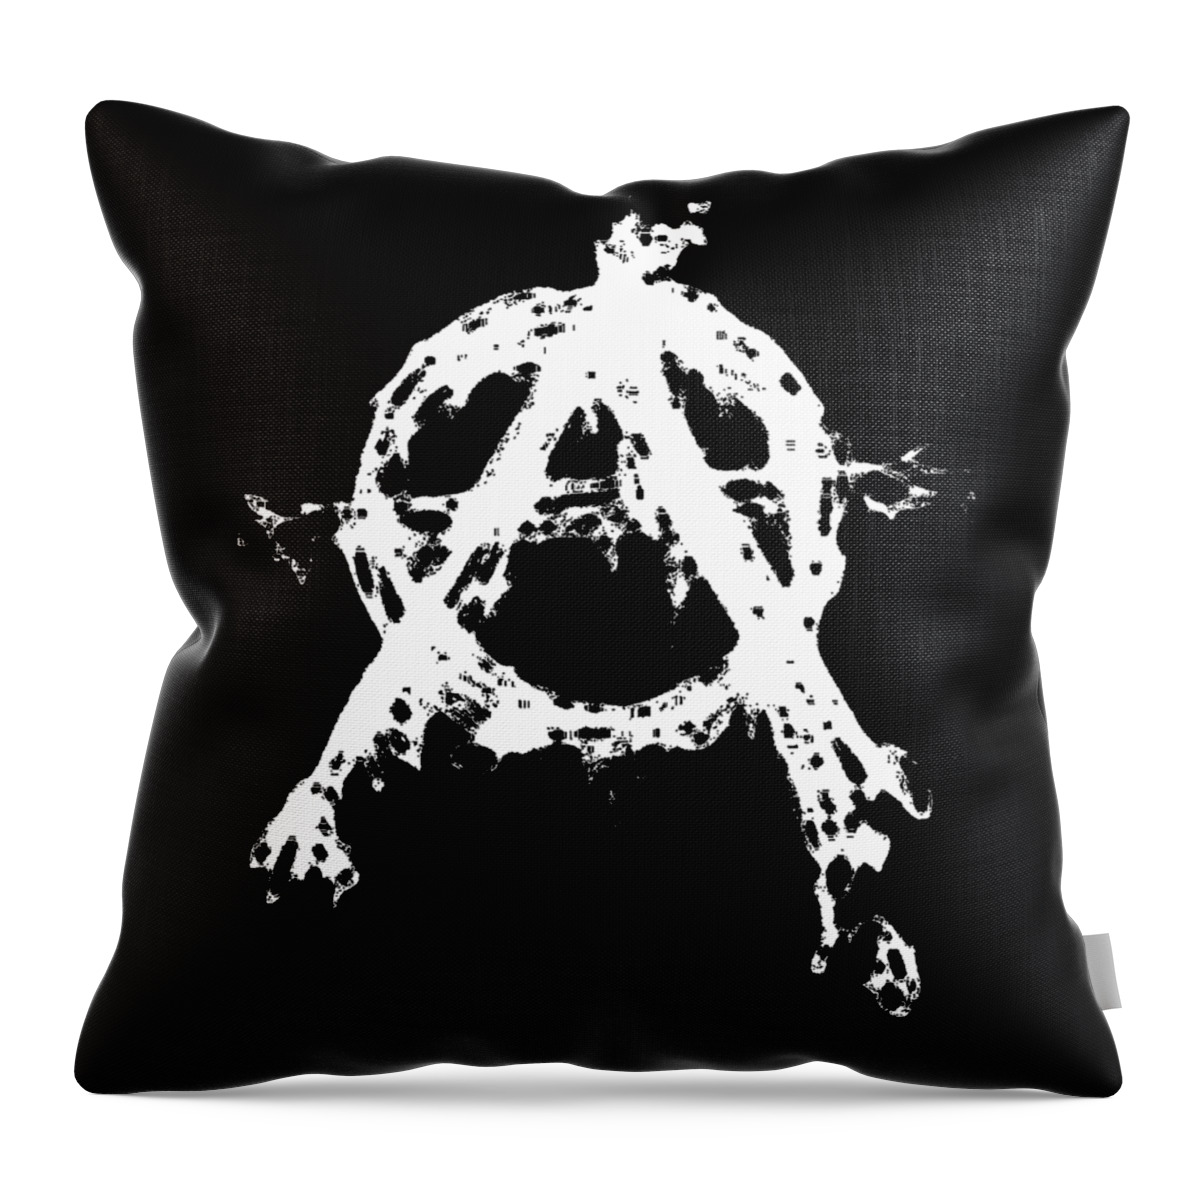 Anarchy Throw Pillow featuring the digital art Anarchy Graphic by Roseanne Jones